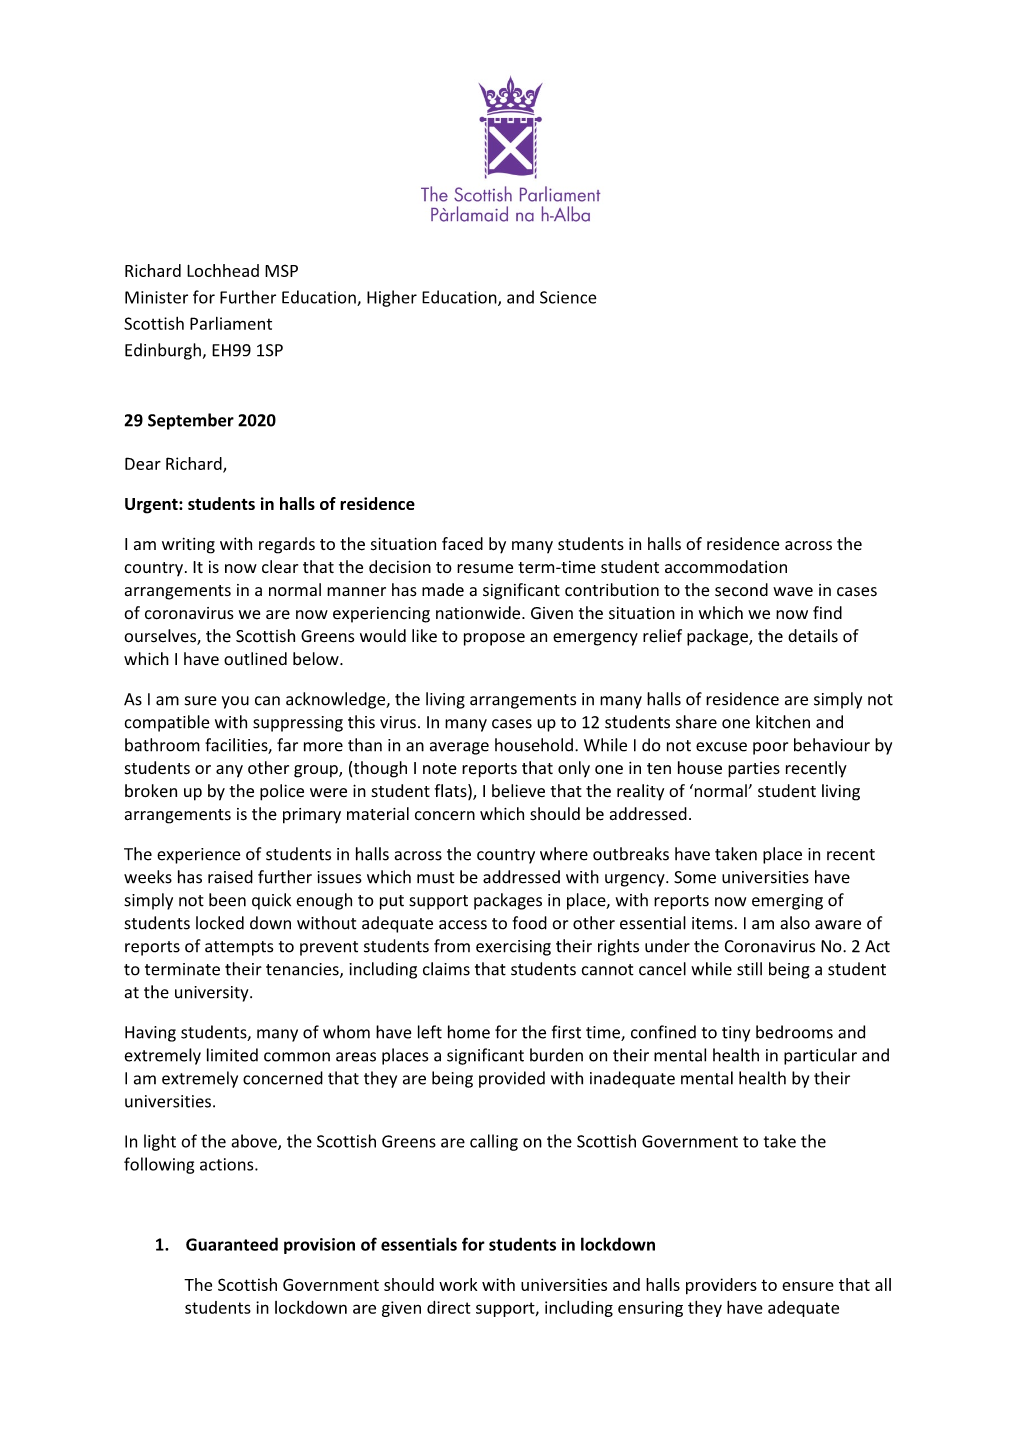 Ross Greer Letter to Richard Lochhead.Pdf